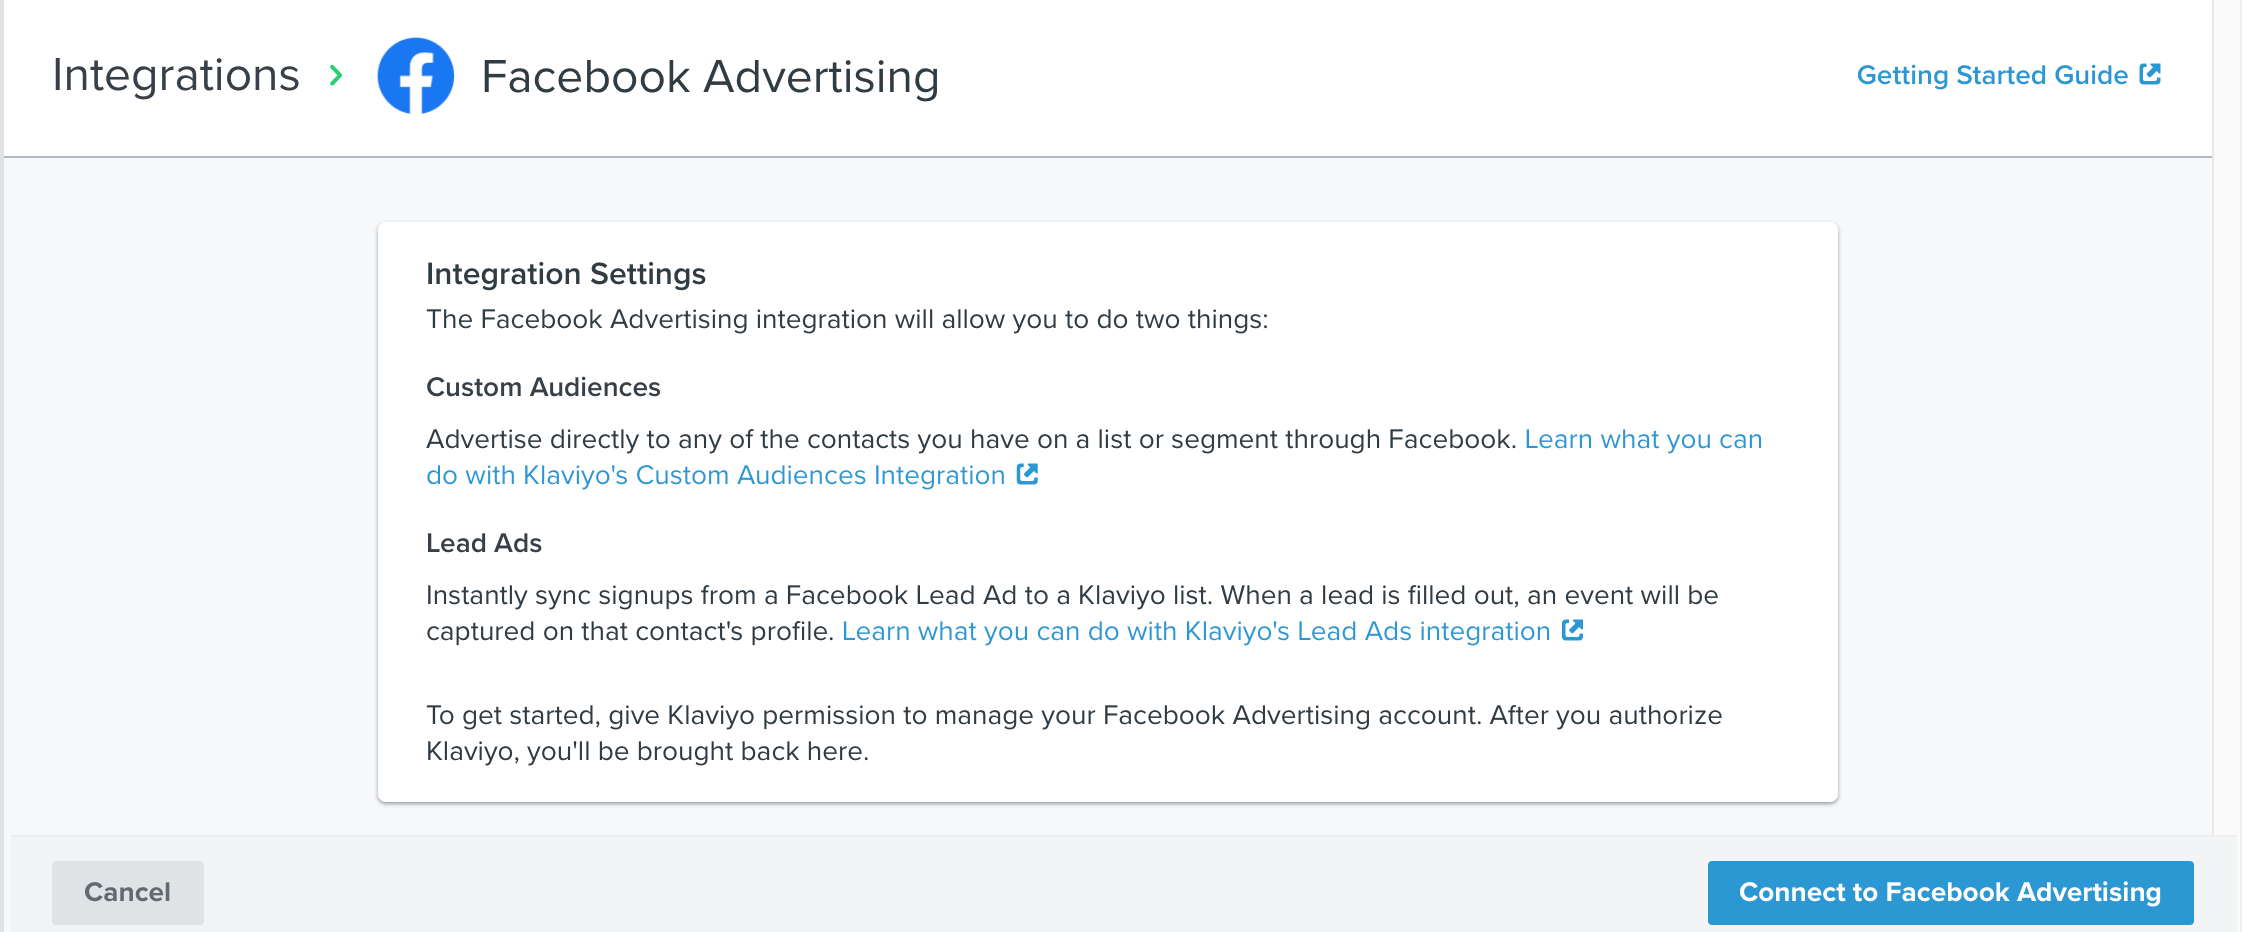 Klaviyo’s dashboard Facebook Ad settings page, with Custom Audiences and Lead Ads to connect to Facebook Advertising